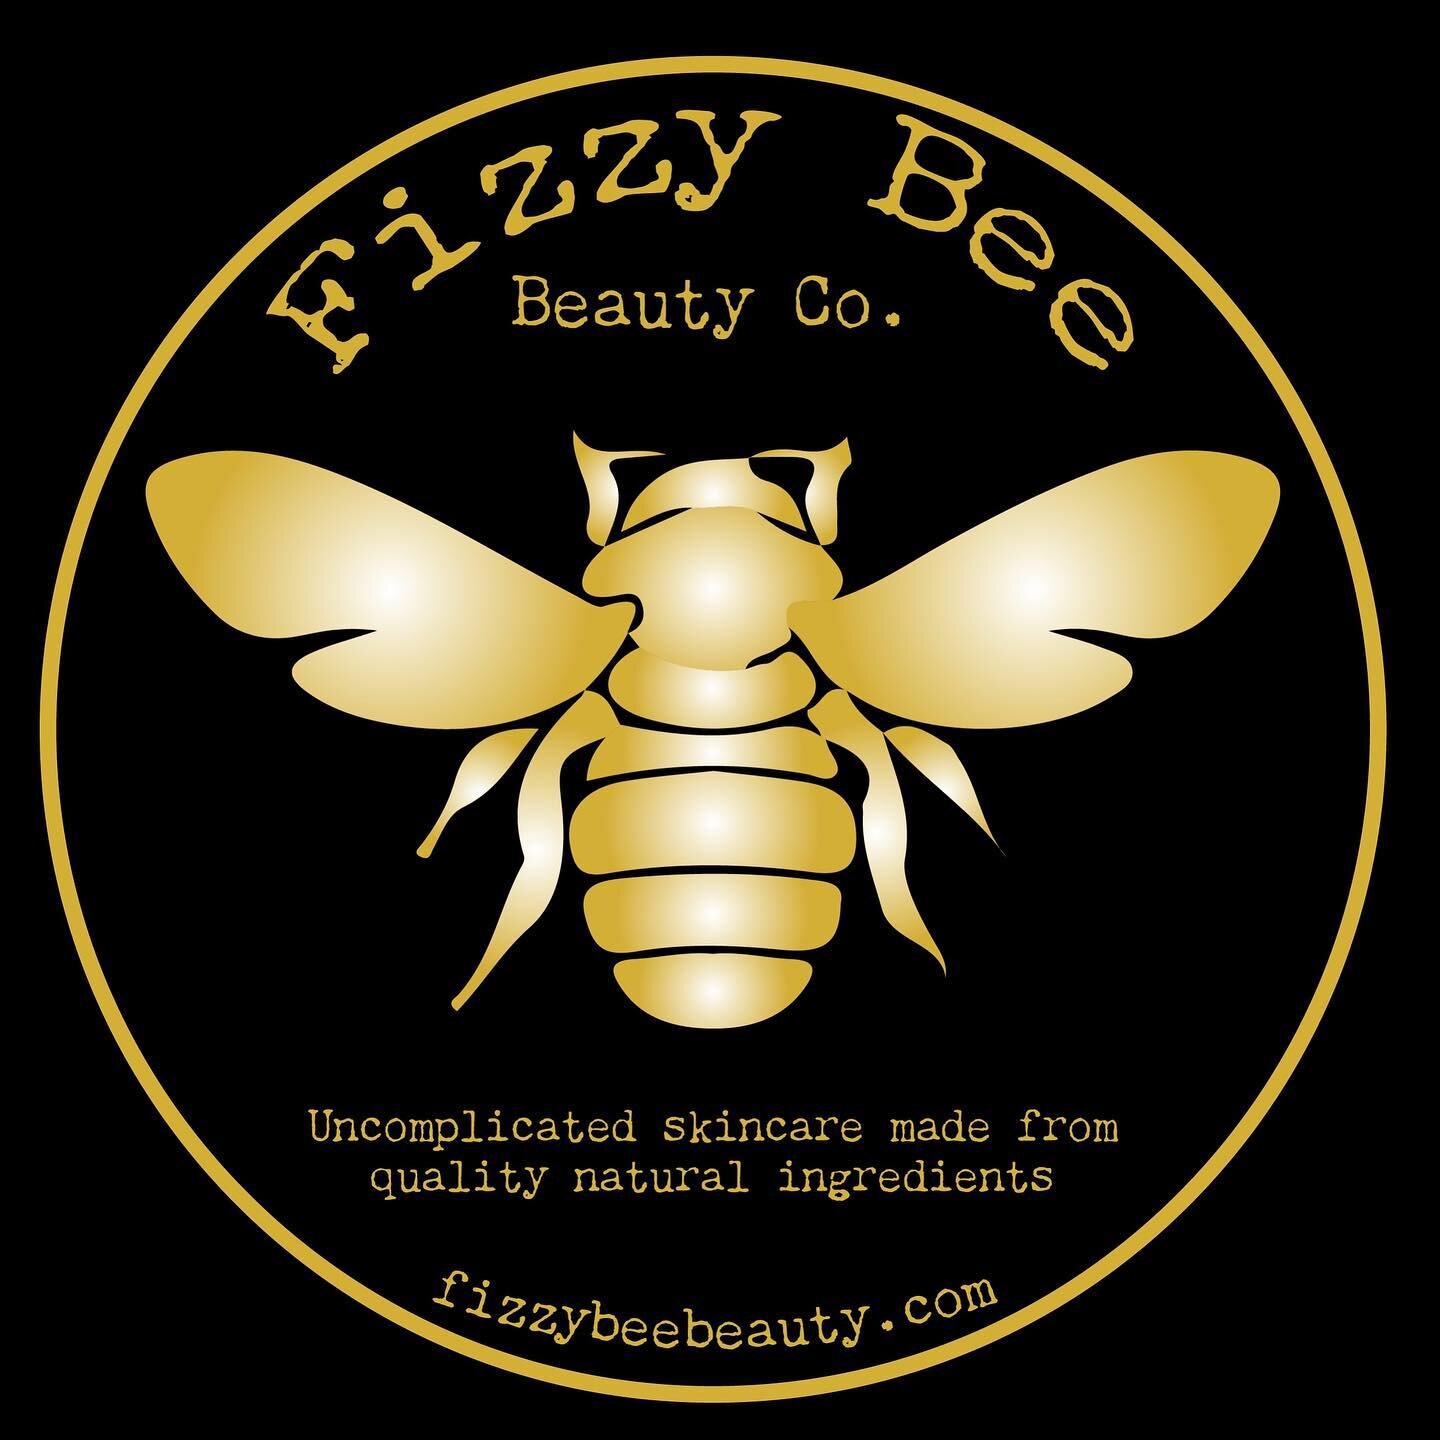 Fizzy Bee had a glow-up!!! Some of you may have already noticed it, but there's a new website. 🙌🏽
As an introduction, If you shop between now and Feb. 6th you'll receive 20% off your order. Use code: GLOWUP upon checkout. 
Like, share and visit my 